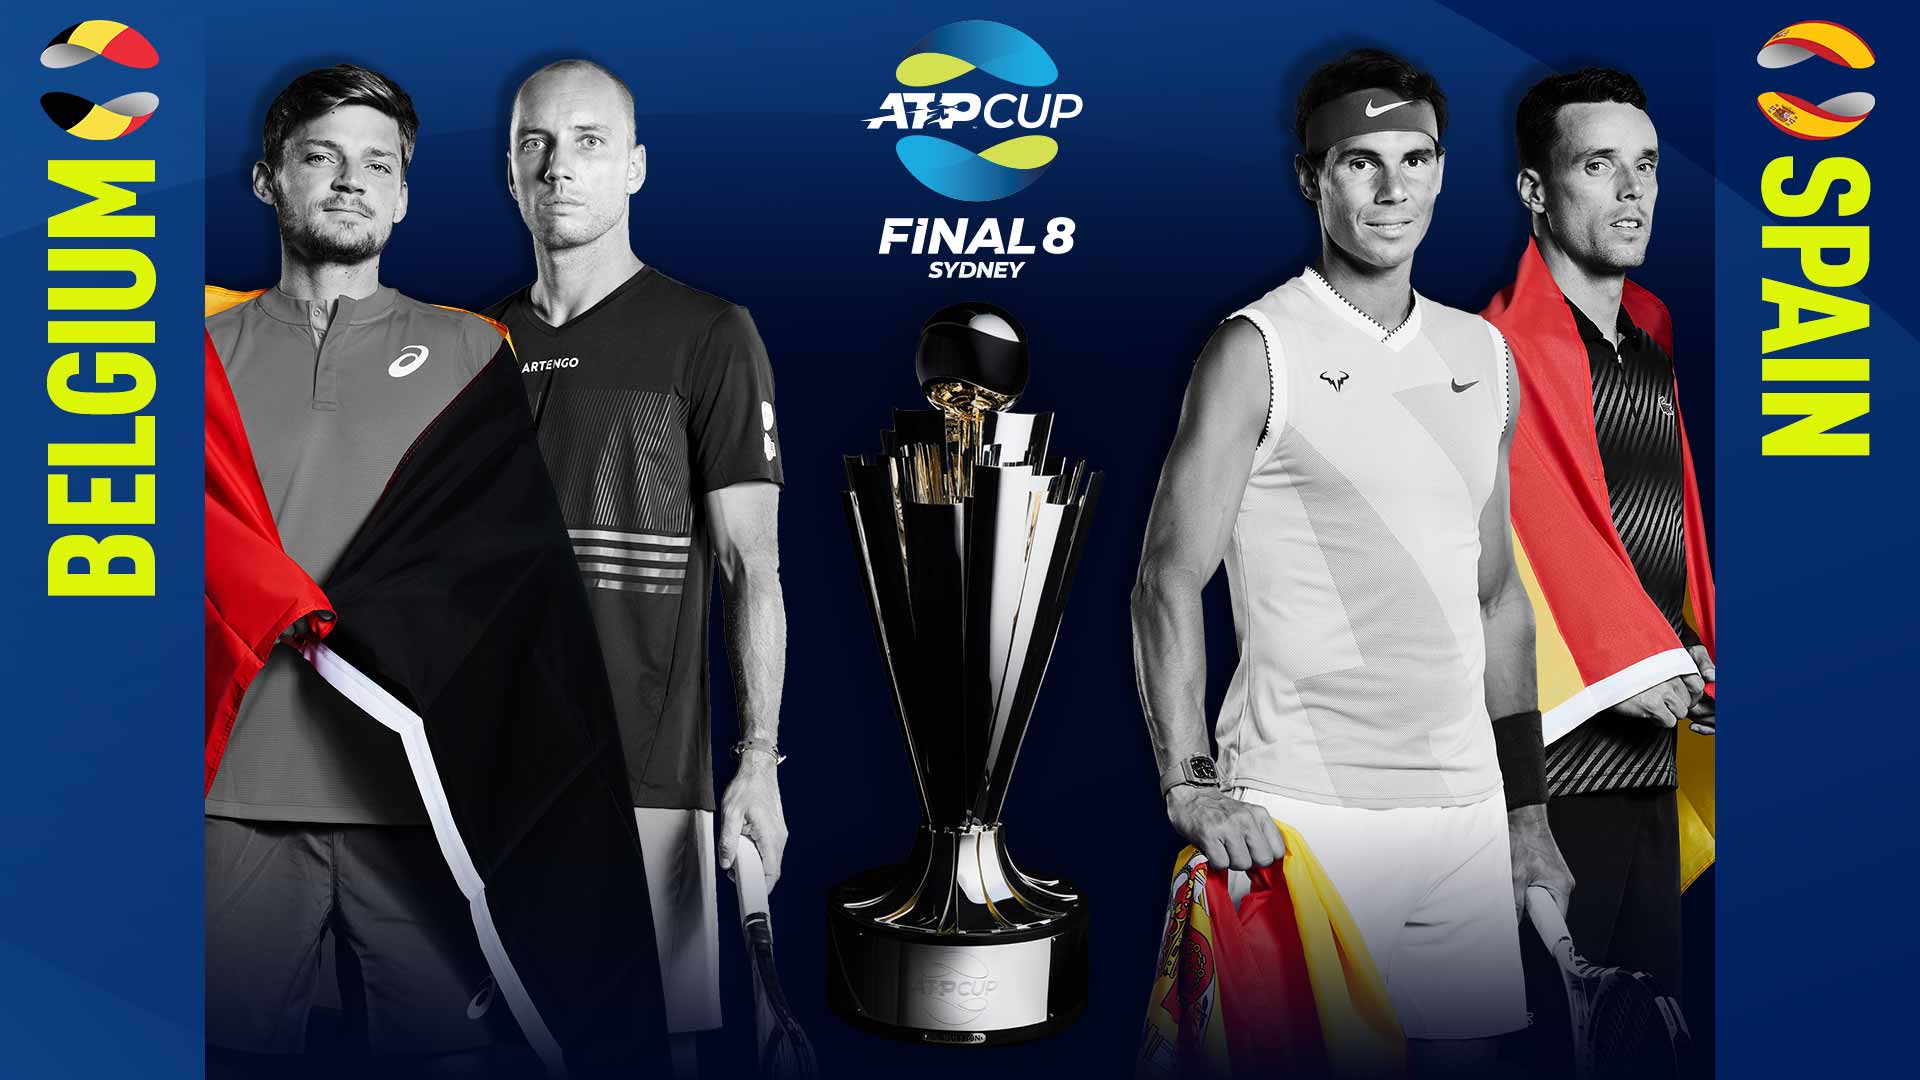 Belgium and Spain will meet in the night session on 10 January at the ATP Cup.